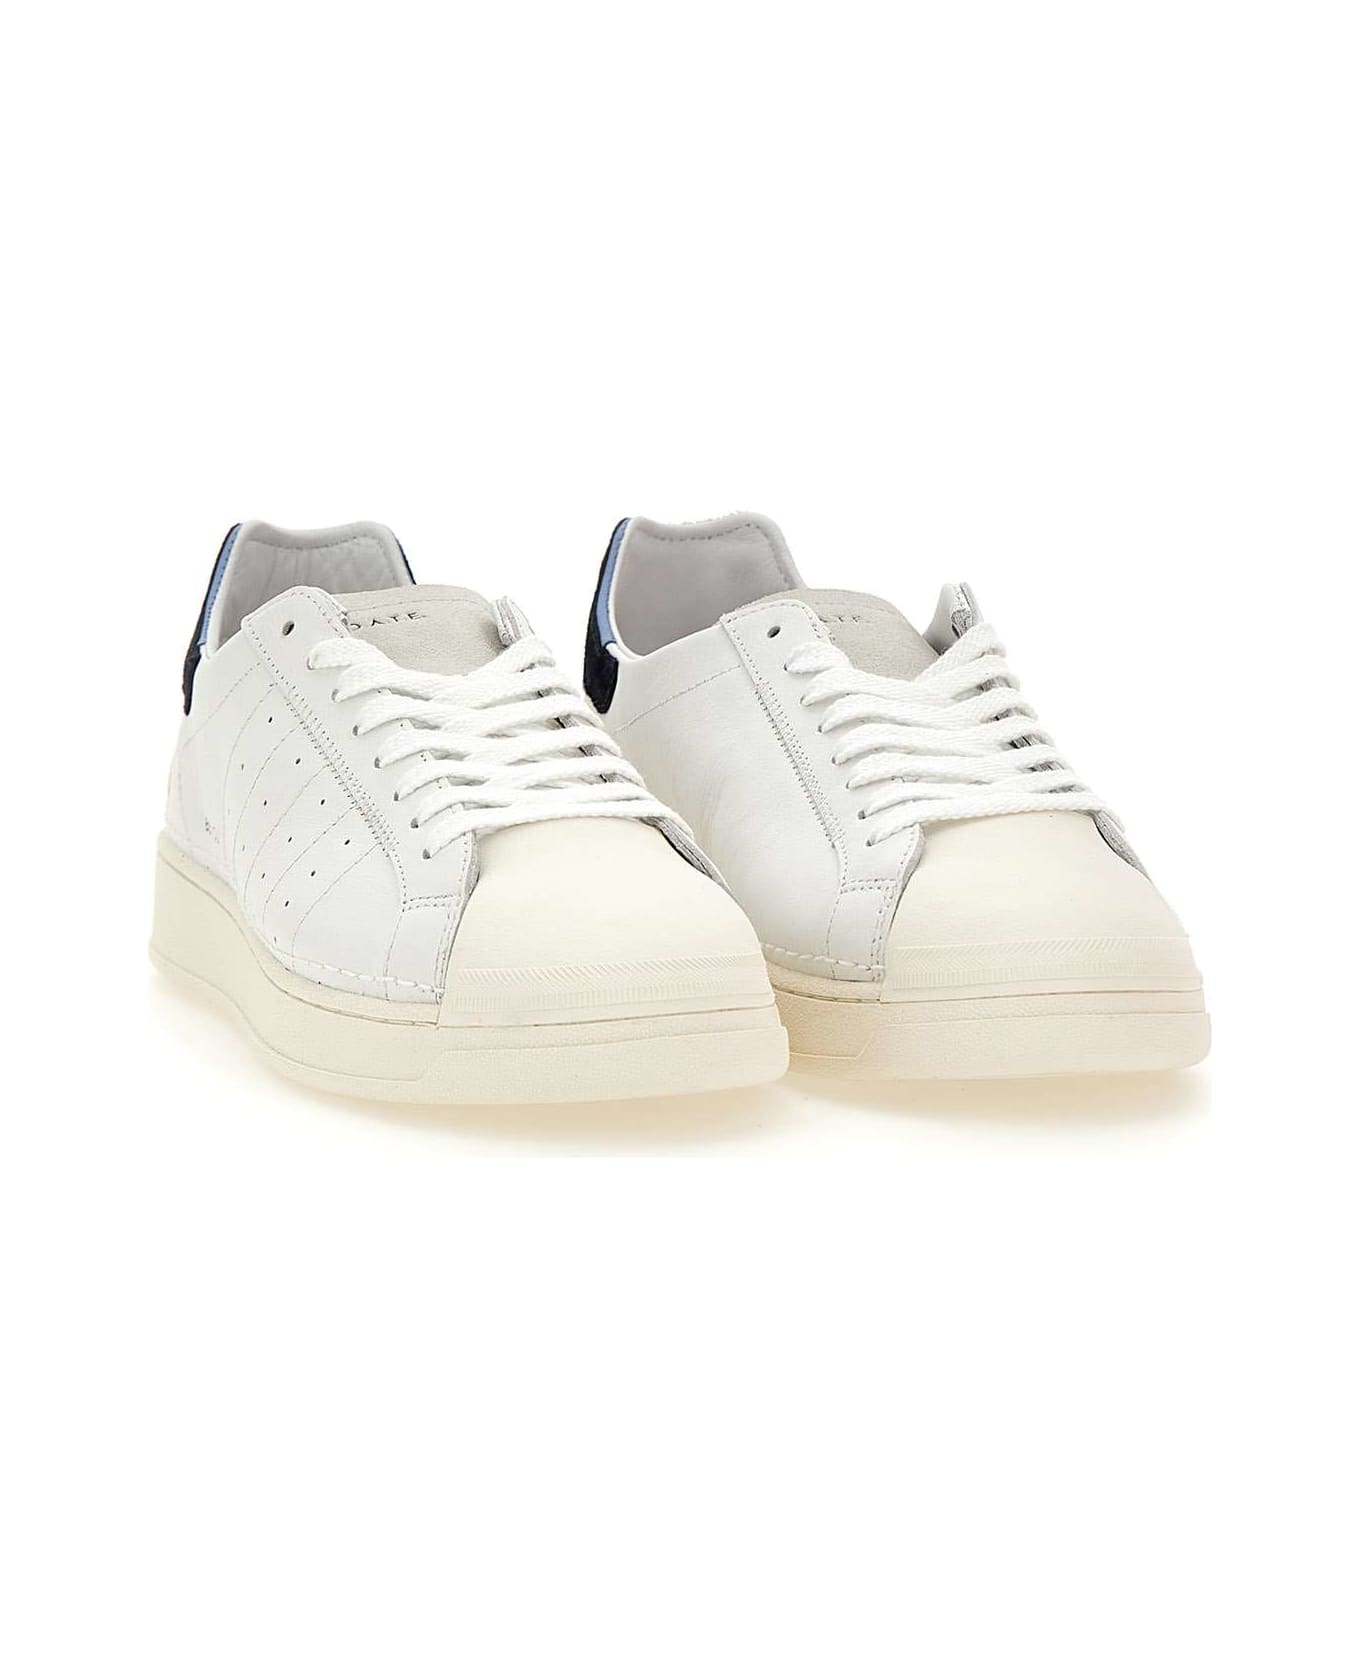 D.A.T.E. "base Calf" Leather Sneakers - WHITE-BLUE